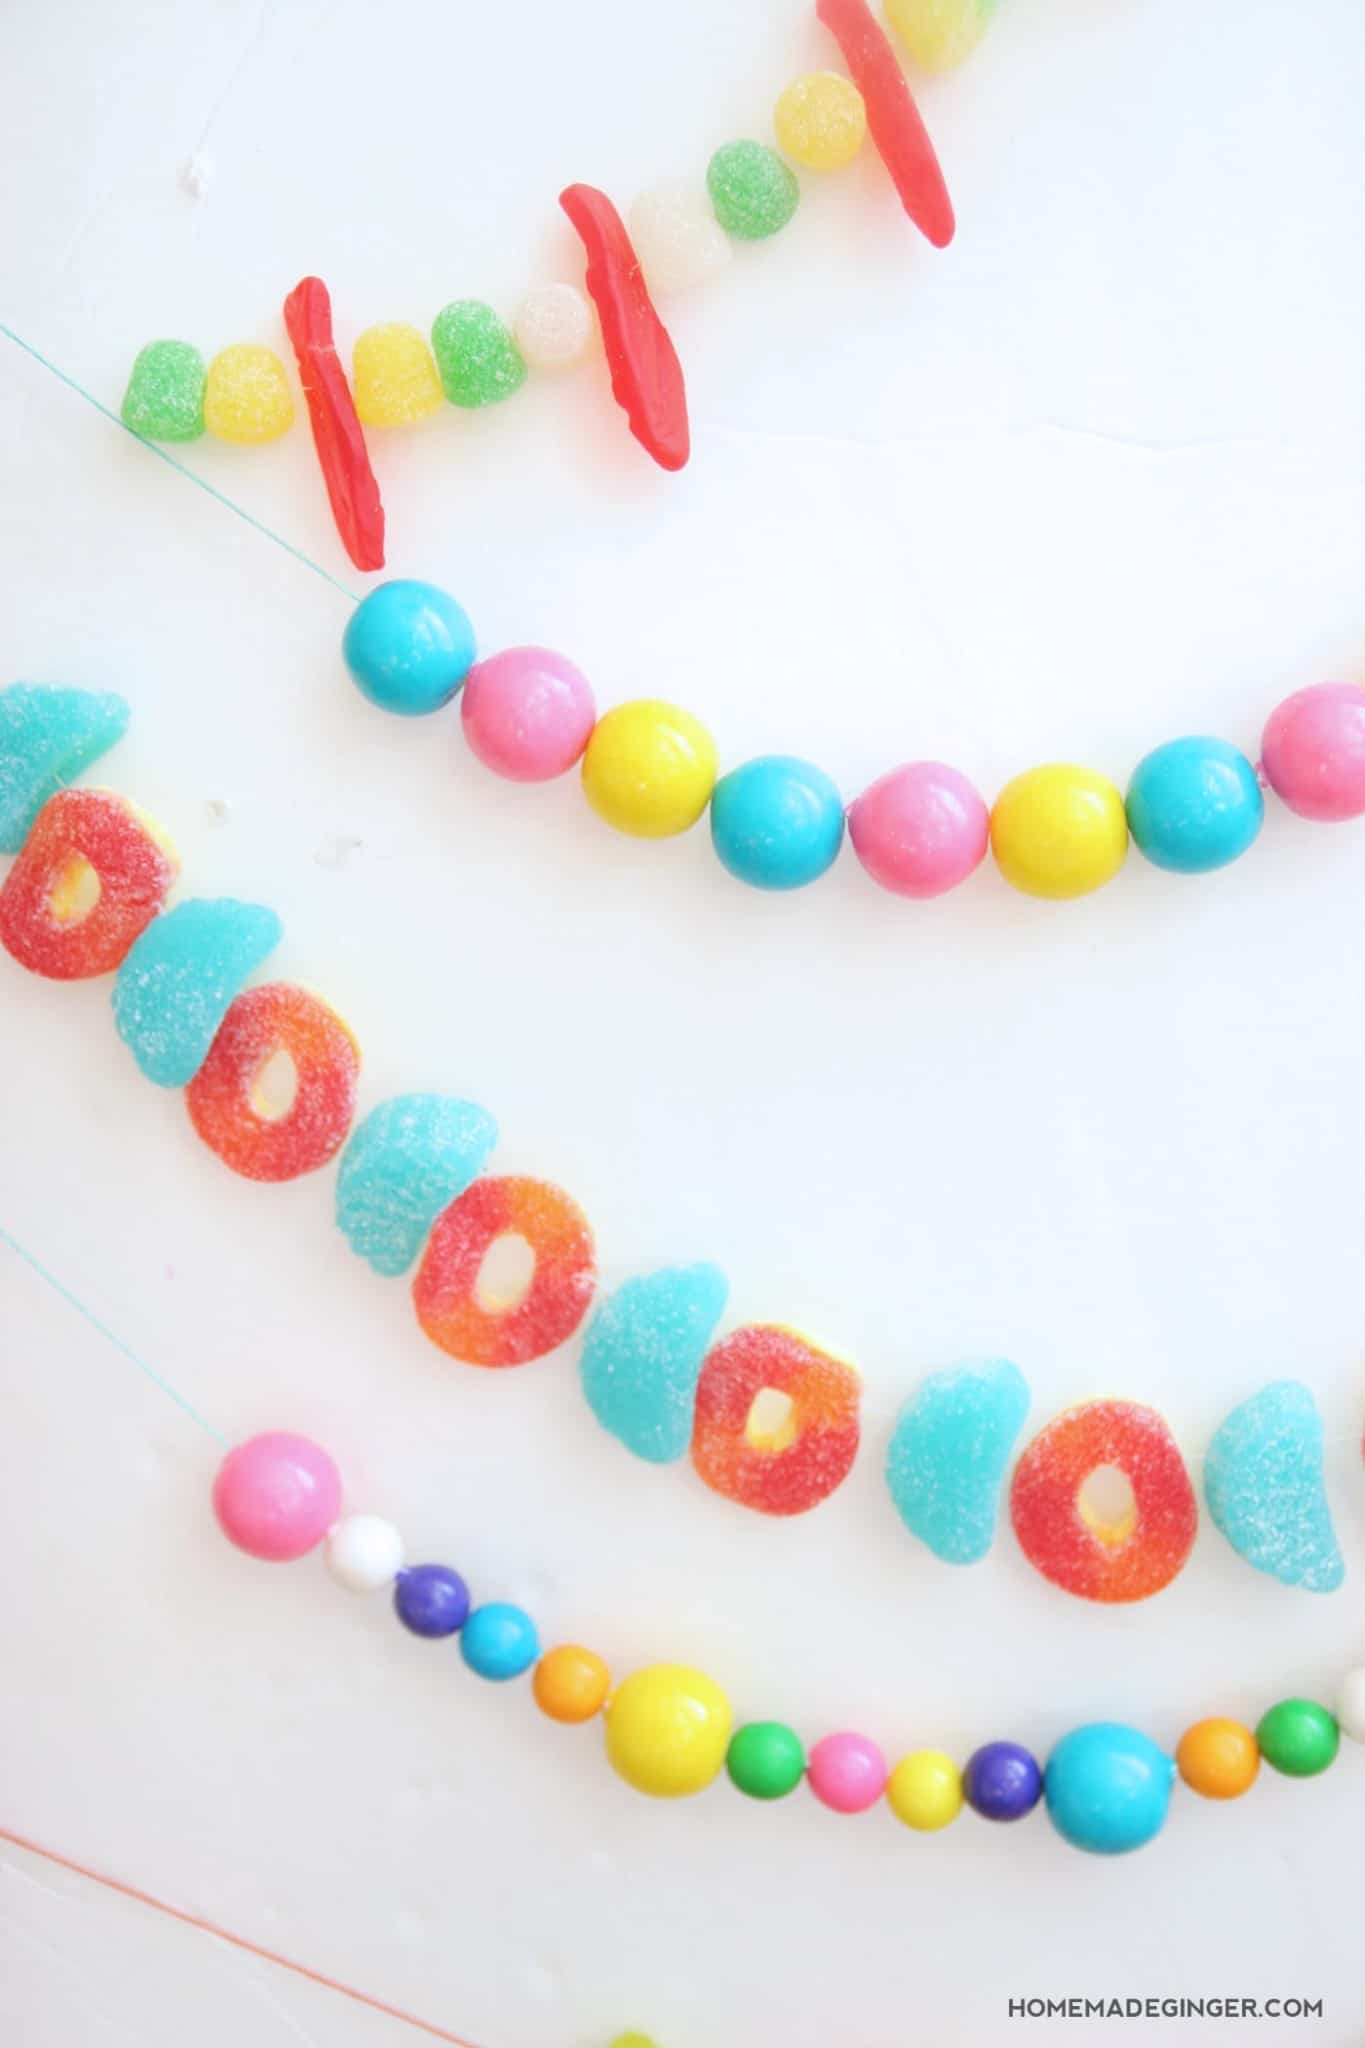 Make a candy garland perfect for the holidays - use to decorate a tree or mantel! These would also be adorable for a child's birthday party.